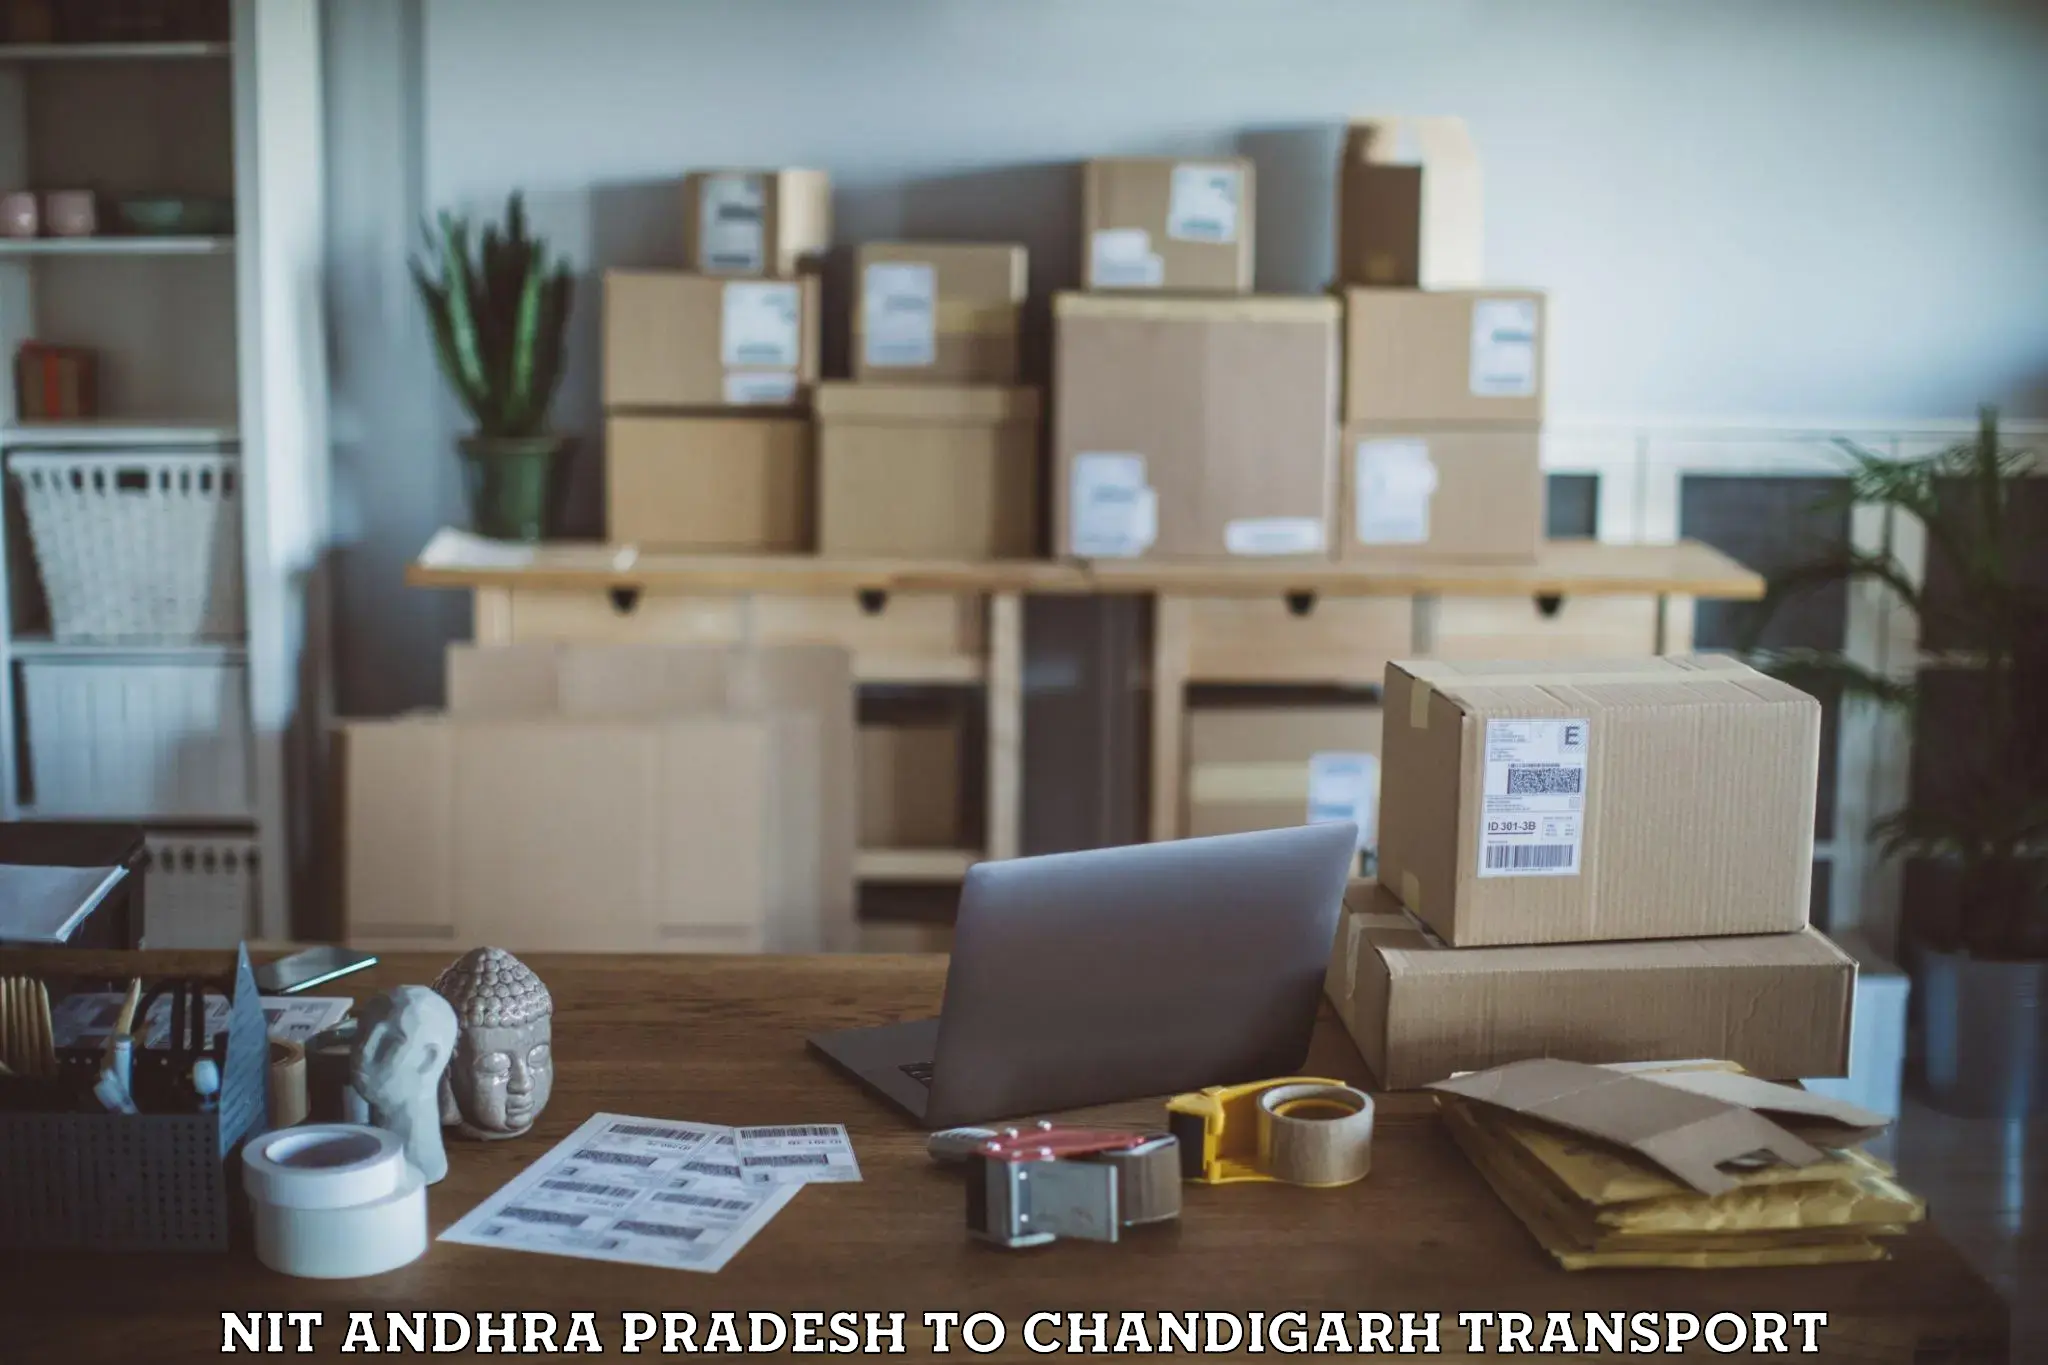 Material transport services NIT Andhra Pradesh to Chandigarh